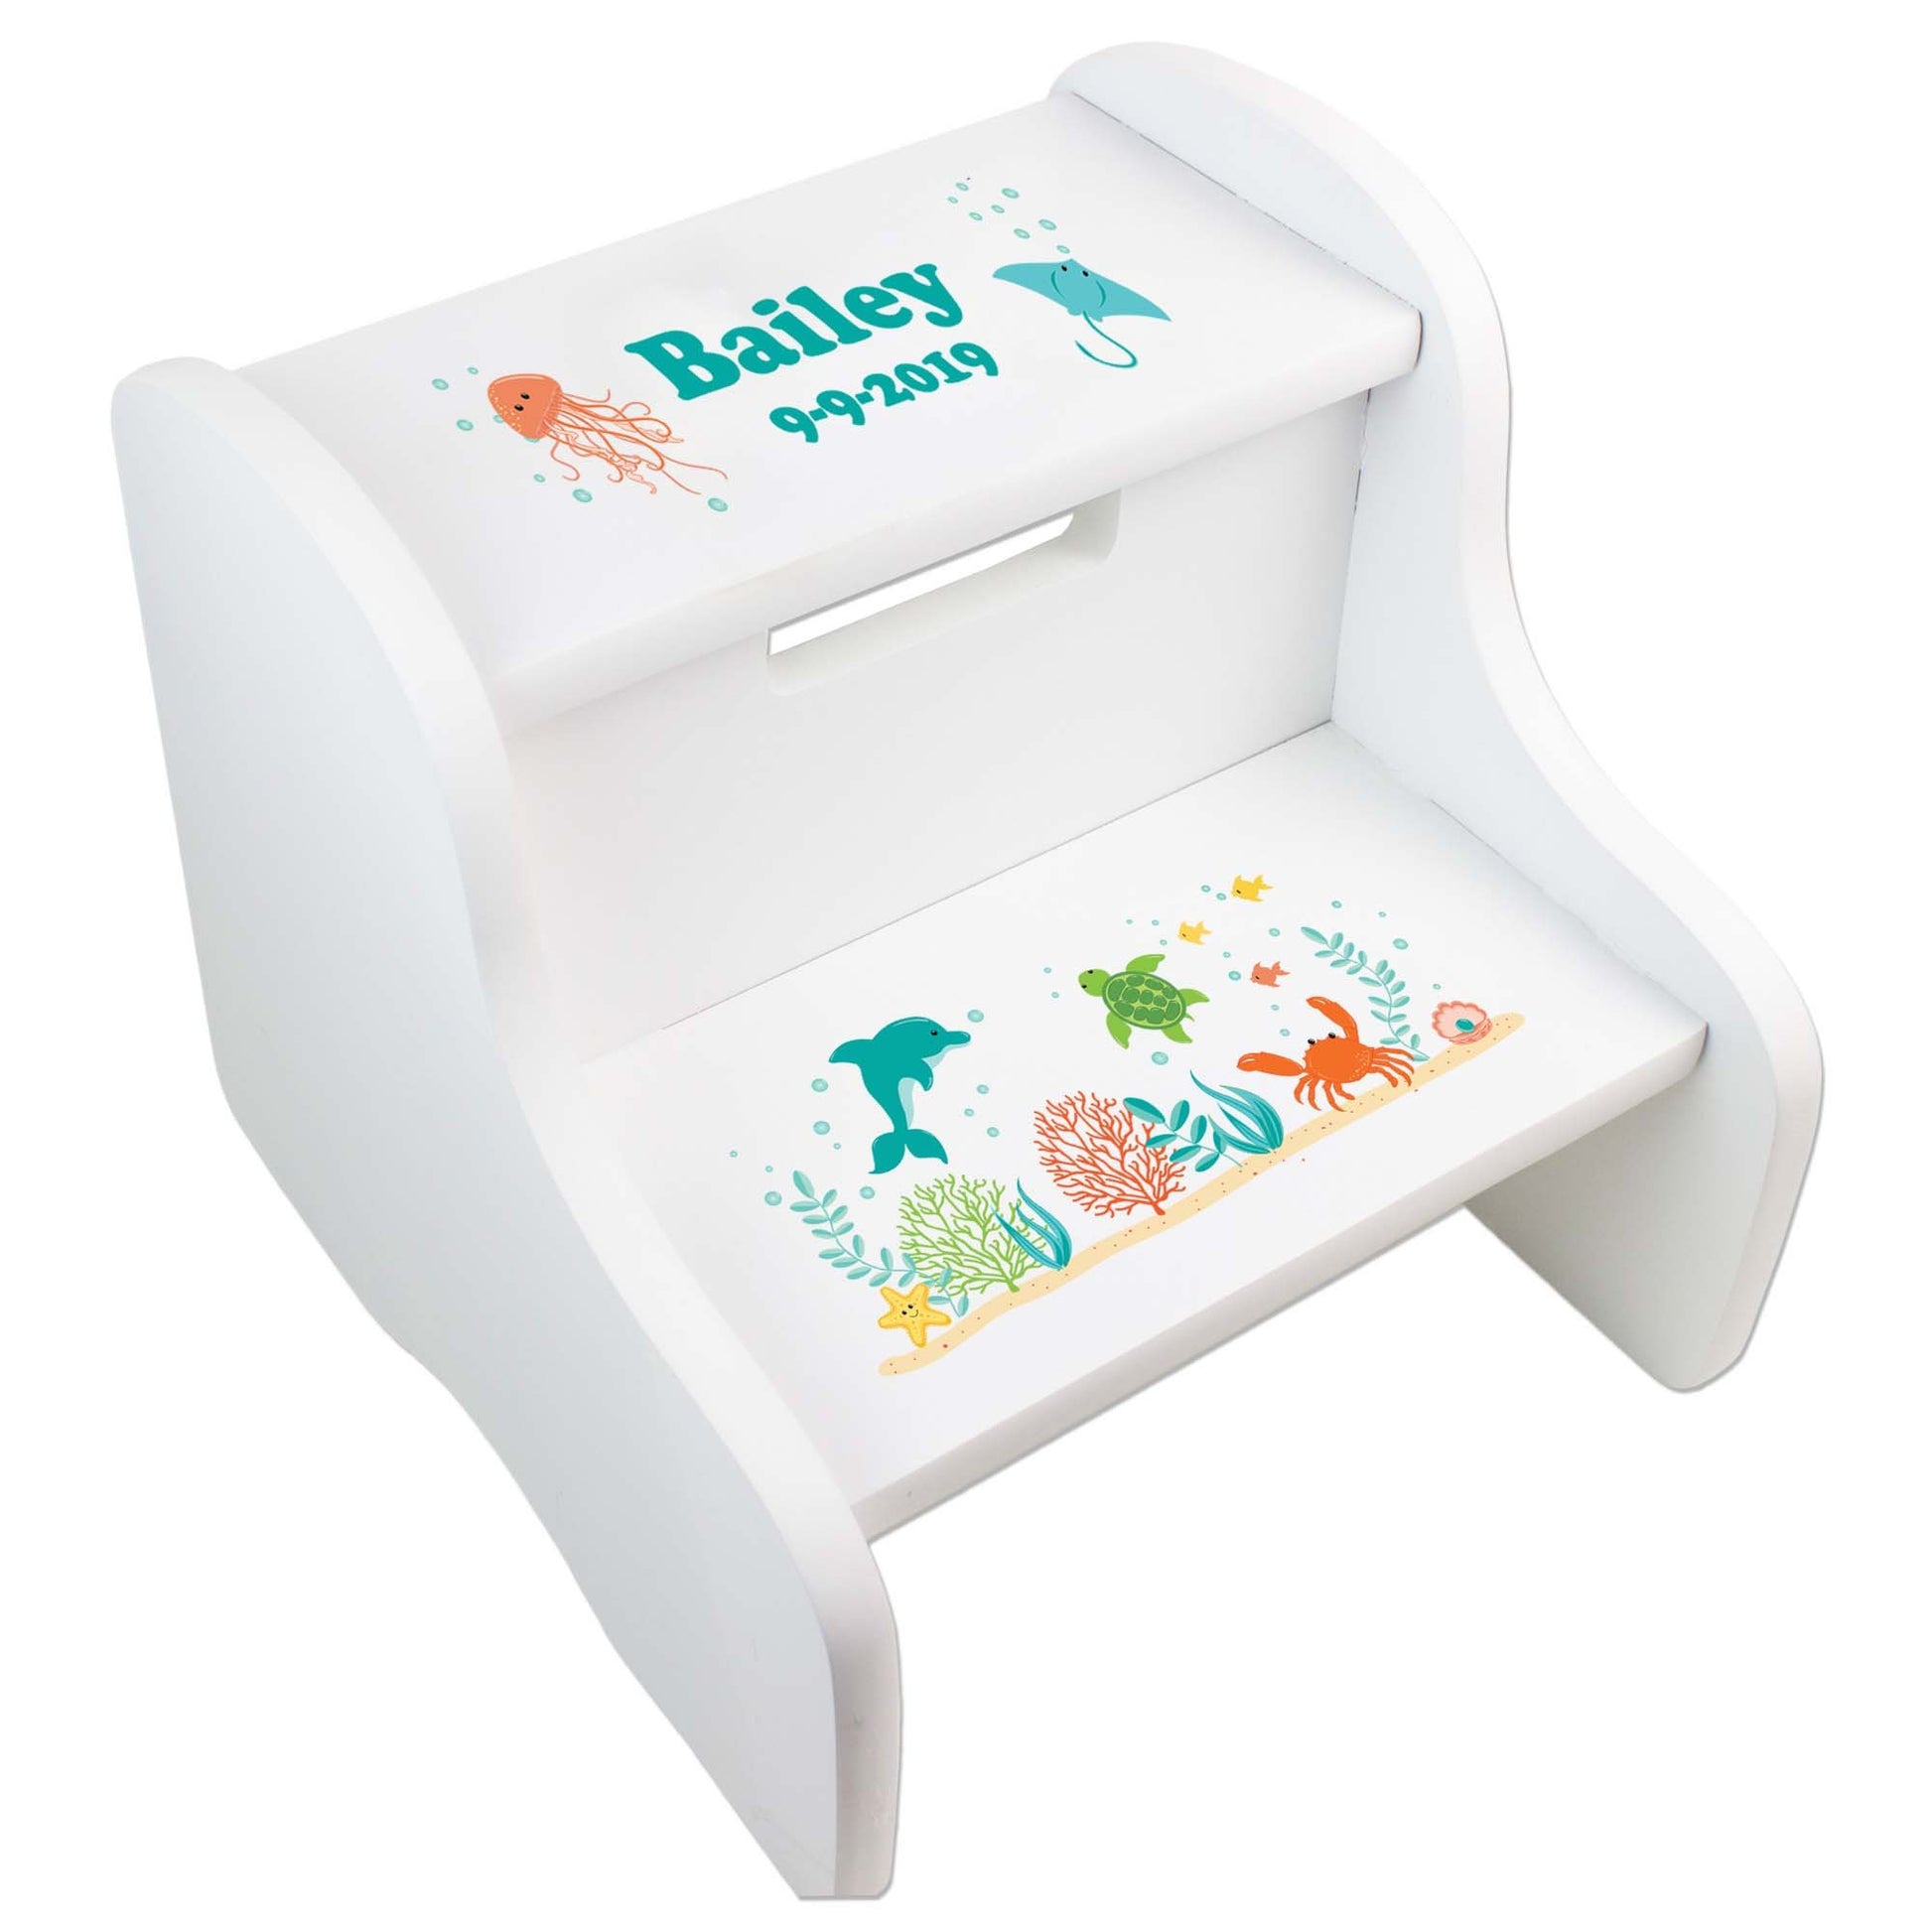 Personalized Hot Air Balloon Step Stool